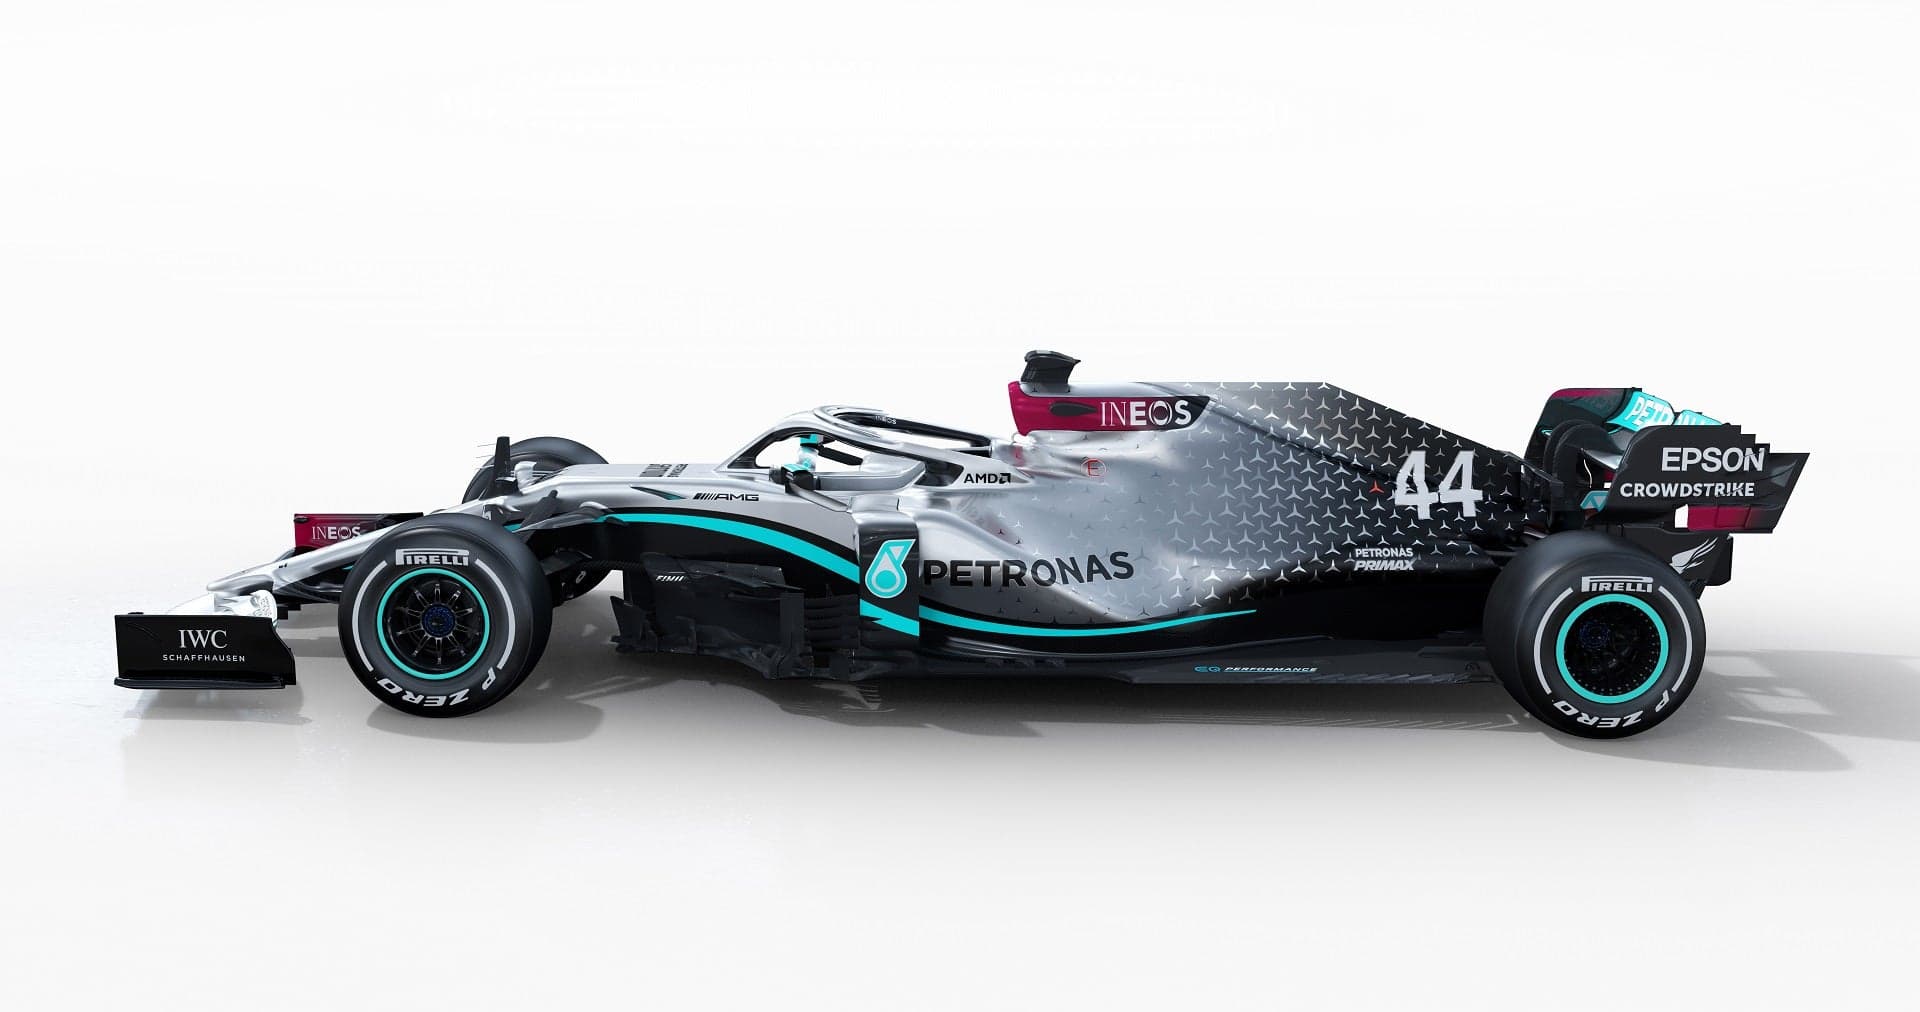 2020 Mercedes-AMG W11: Formula 1’s Gold Standard to Beat